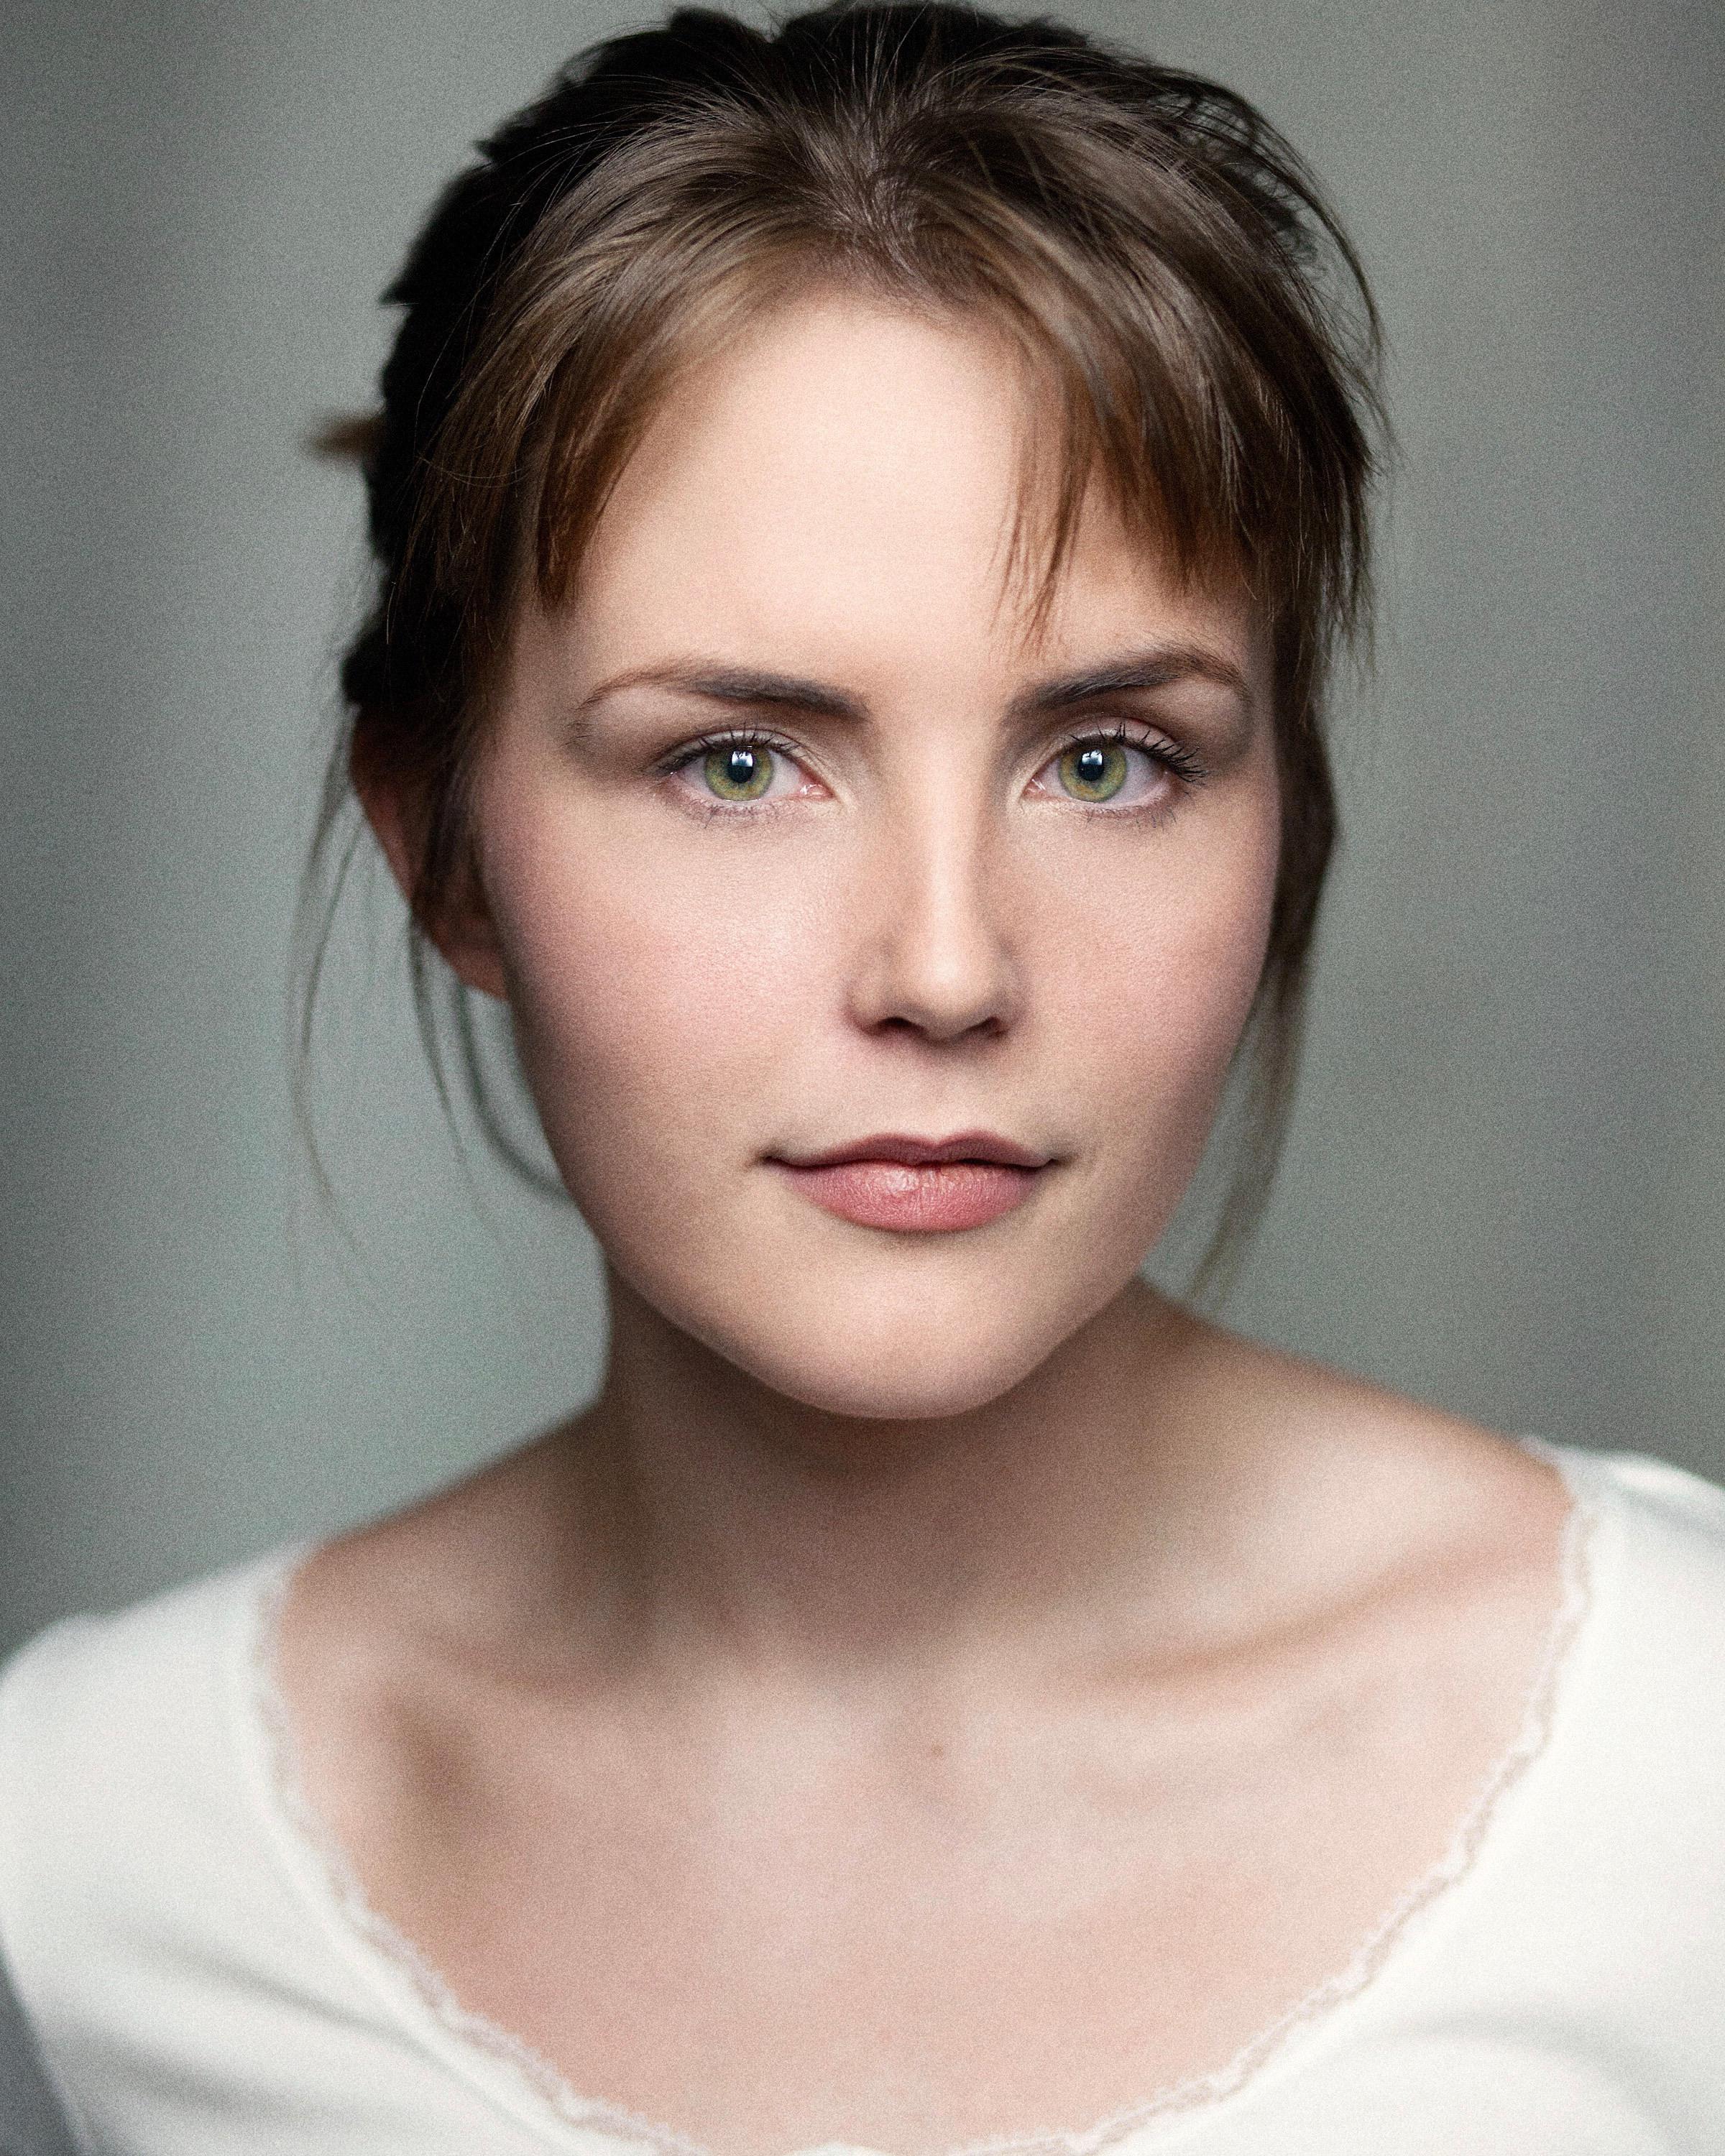 Woman with brown hair tied back with a fringe and green eyes wearing a white top